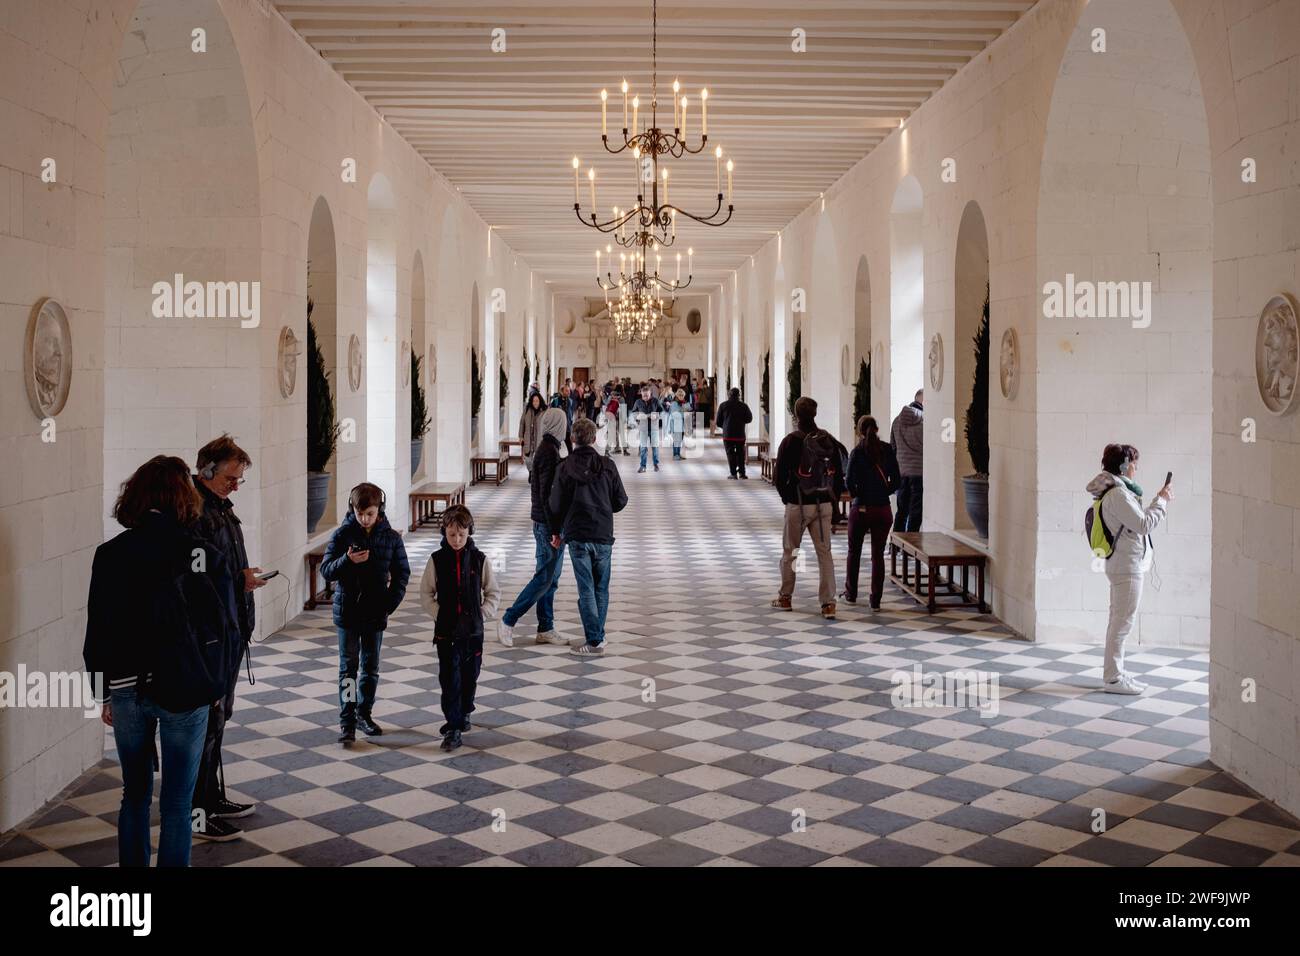 Chenonceau, France - April 15, 2023: Interior of the Chenonceau castle with people. No one is looking at the camera Stock Photo